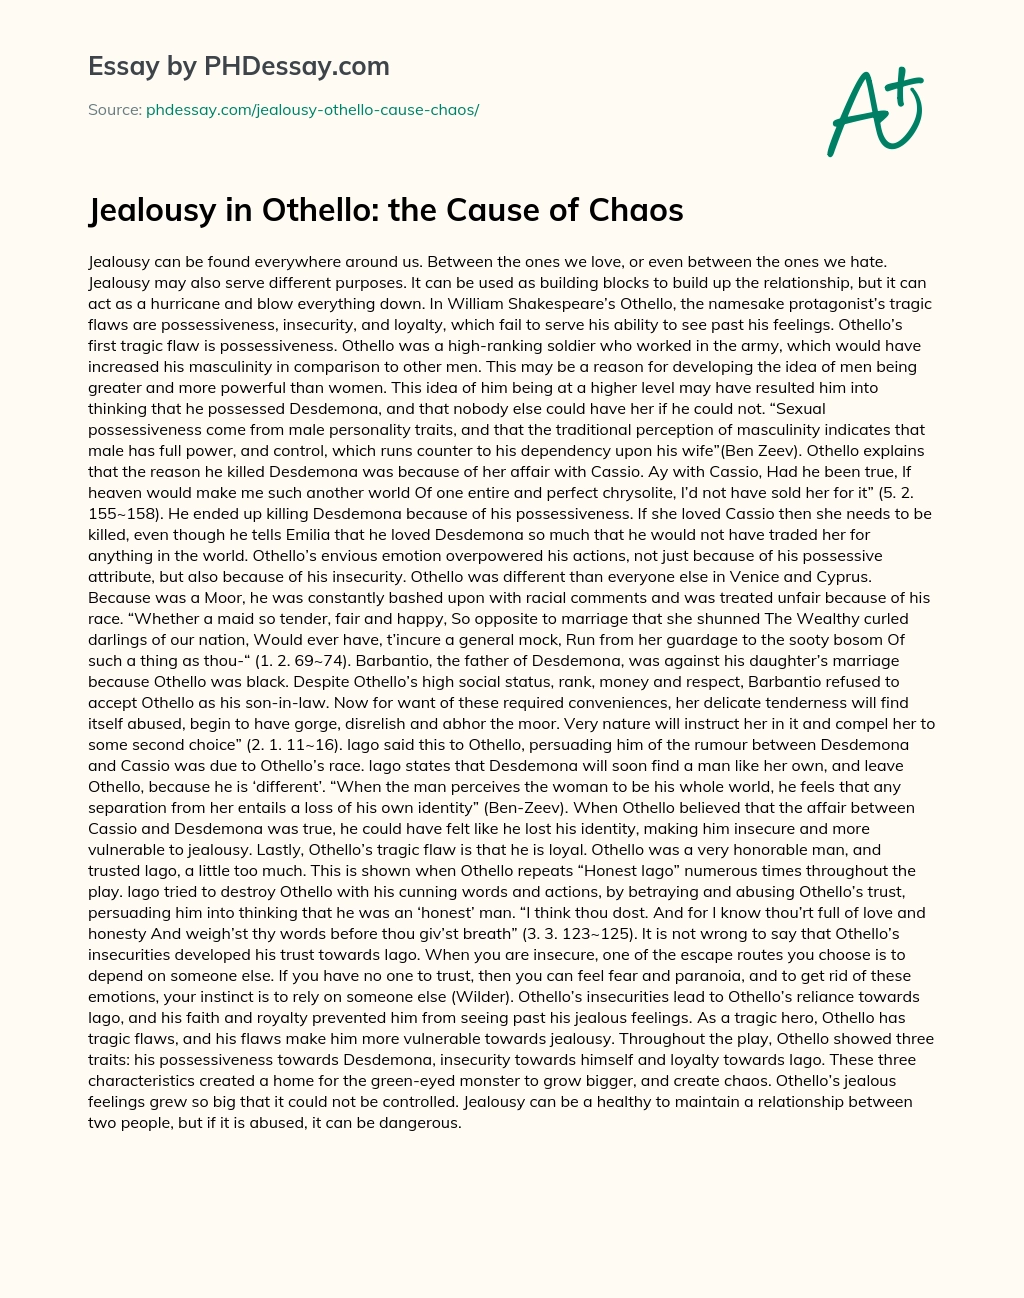 Jealousy in Othello: the Cause of Chaos essay